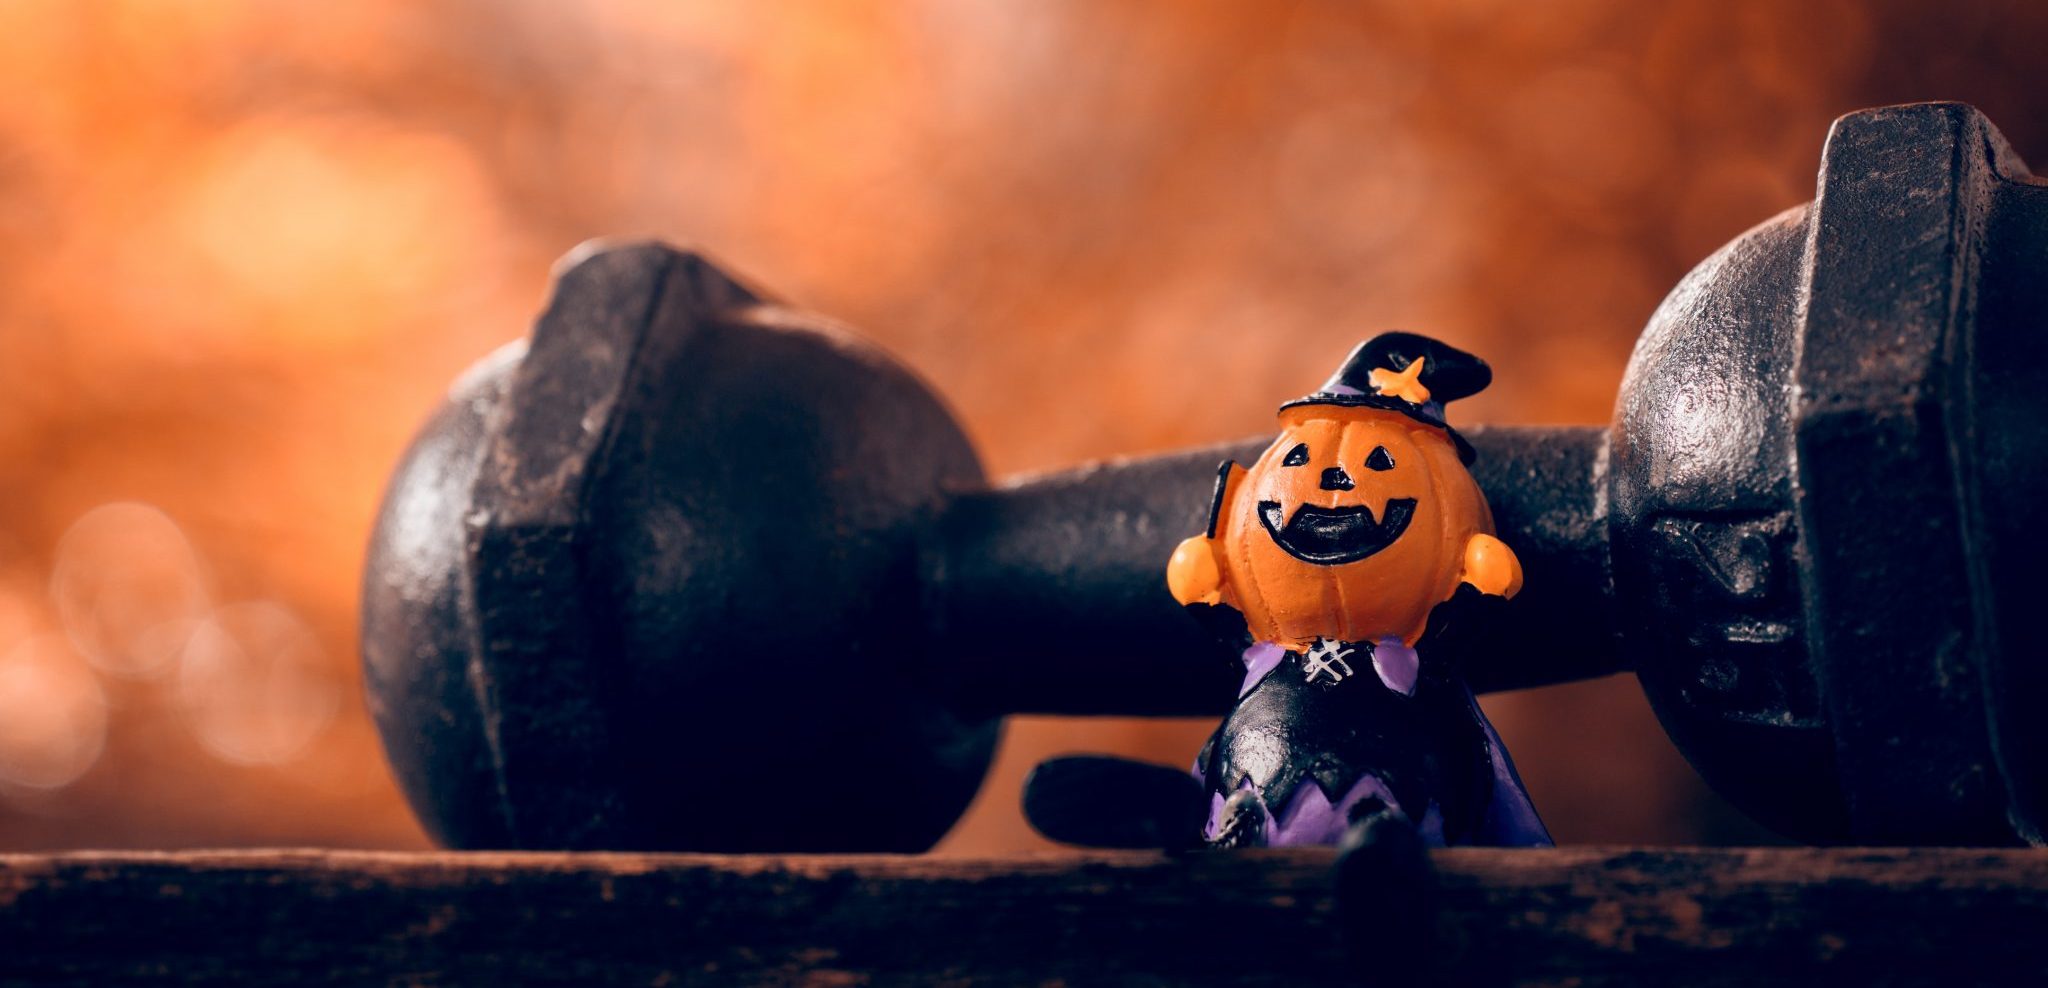 BOO! Halloween Workouts for the Zombie Apocalypse